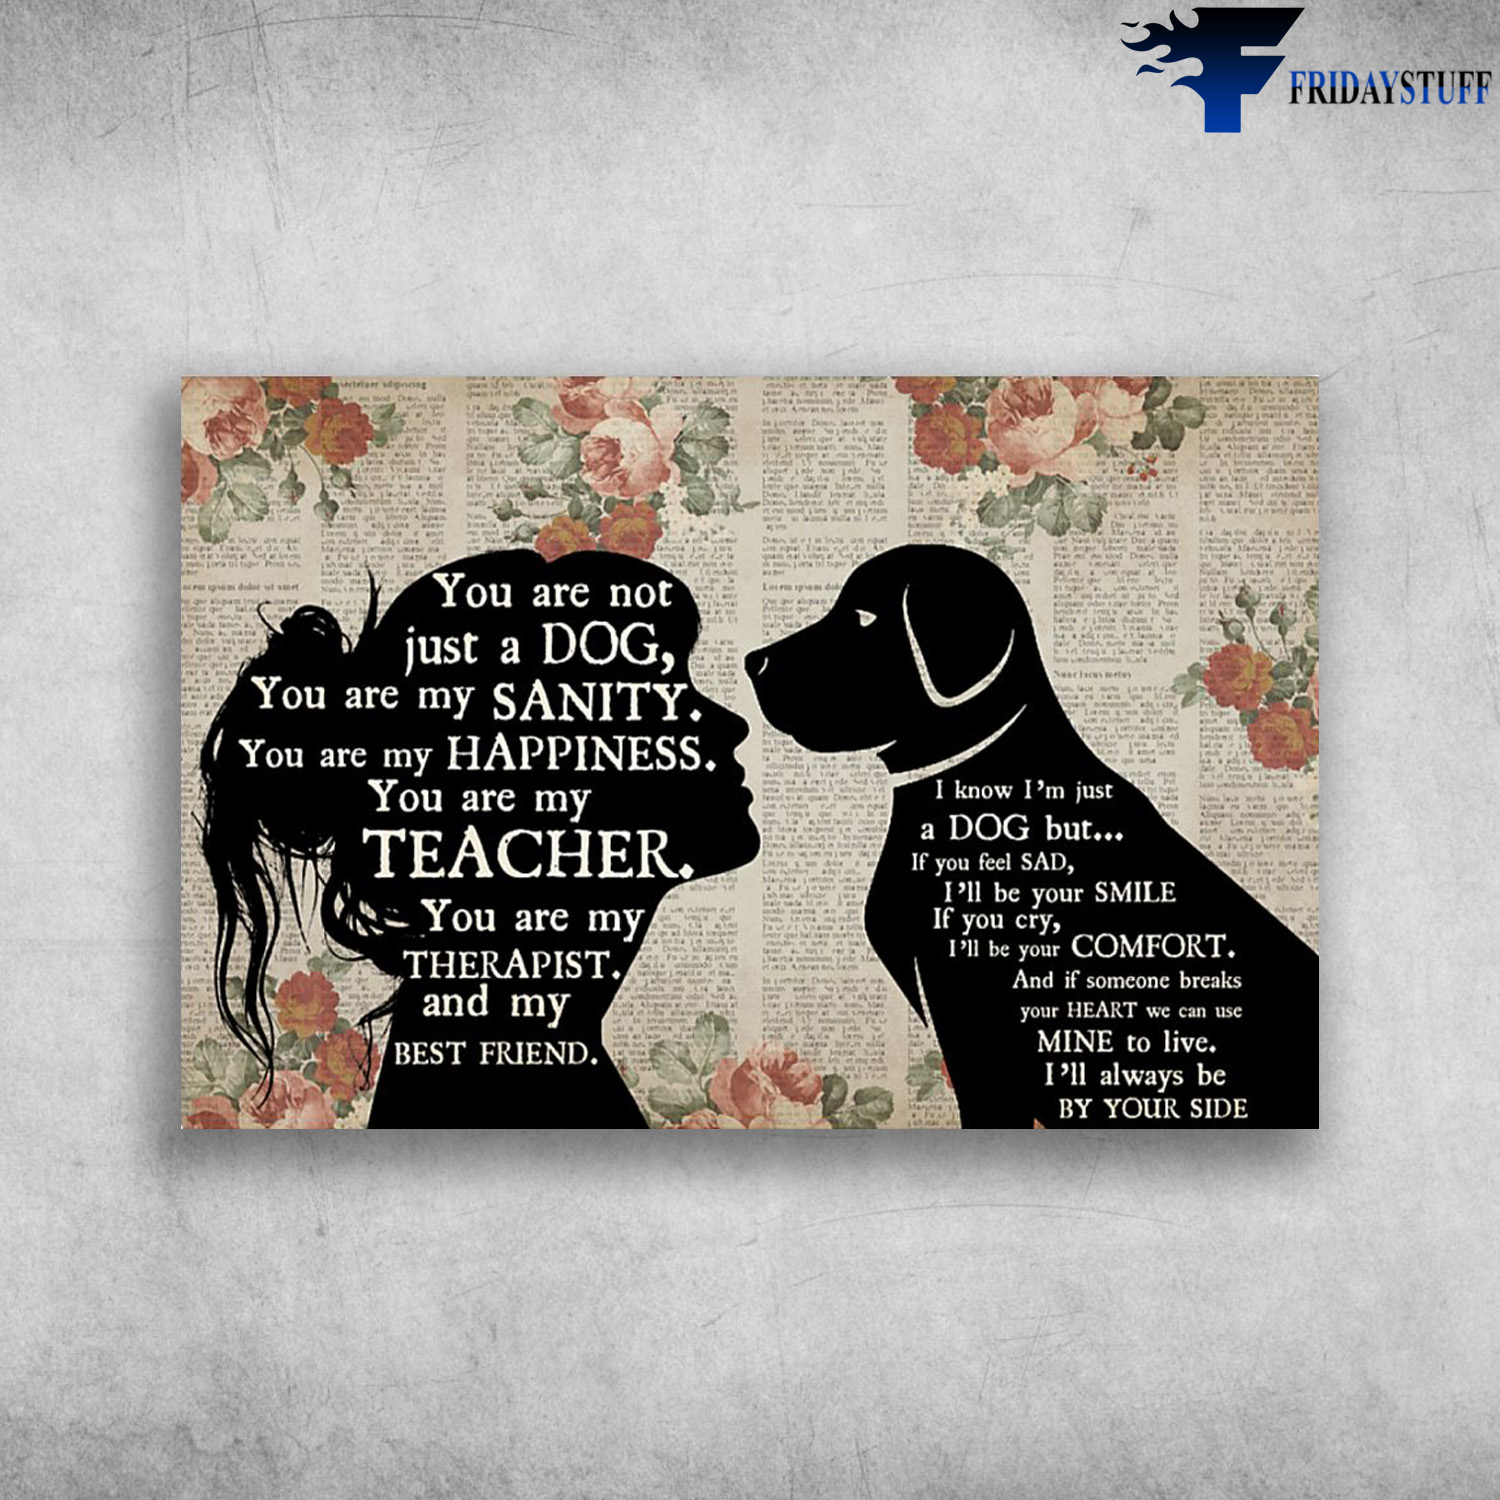 The Best Therapist - You Are Not Just A Dog, You Are My Sanity, You Are My Happiness, You Are My Teacher, You Are My Therappist, And My Best Friend, I Know I'm Just A Dog But, If You Feel Sad, I'll Be Your Smile